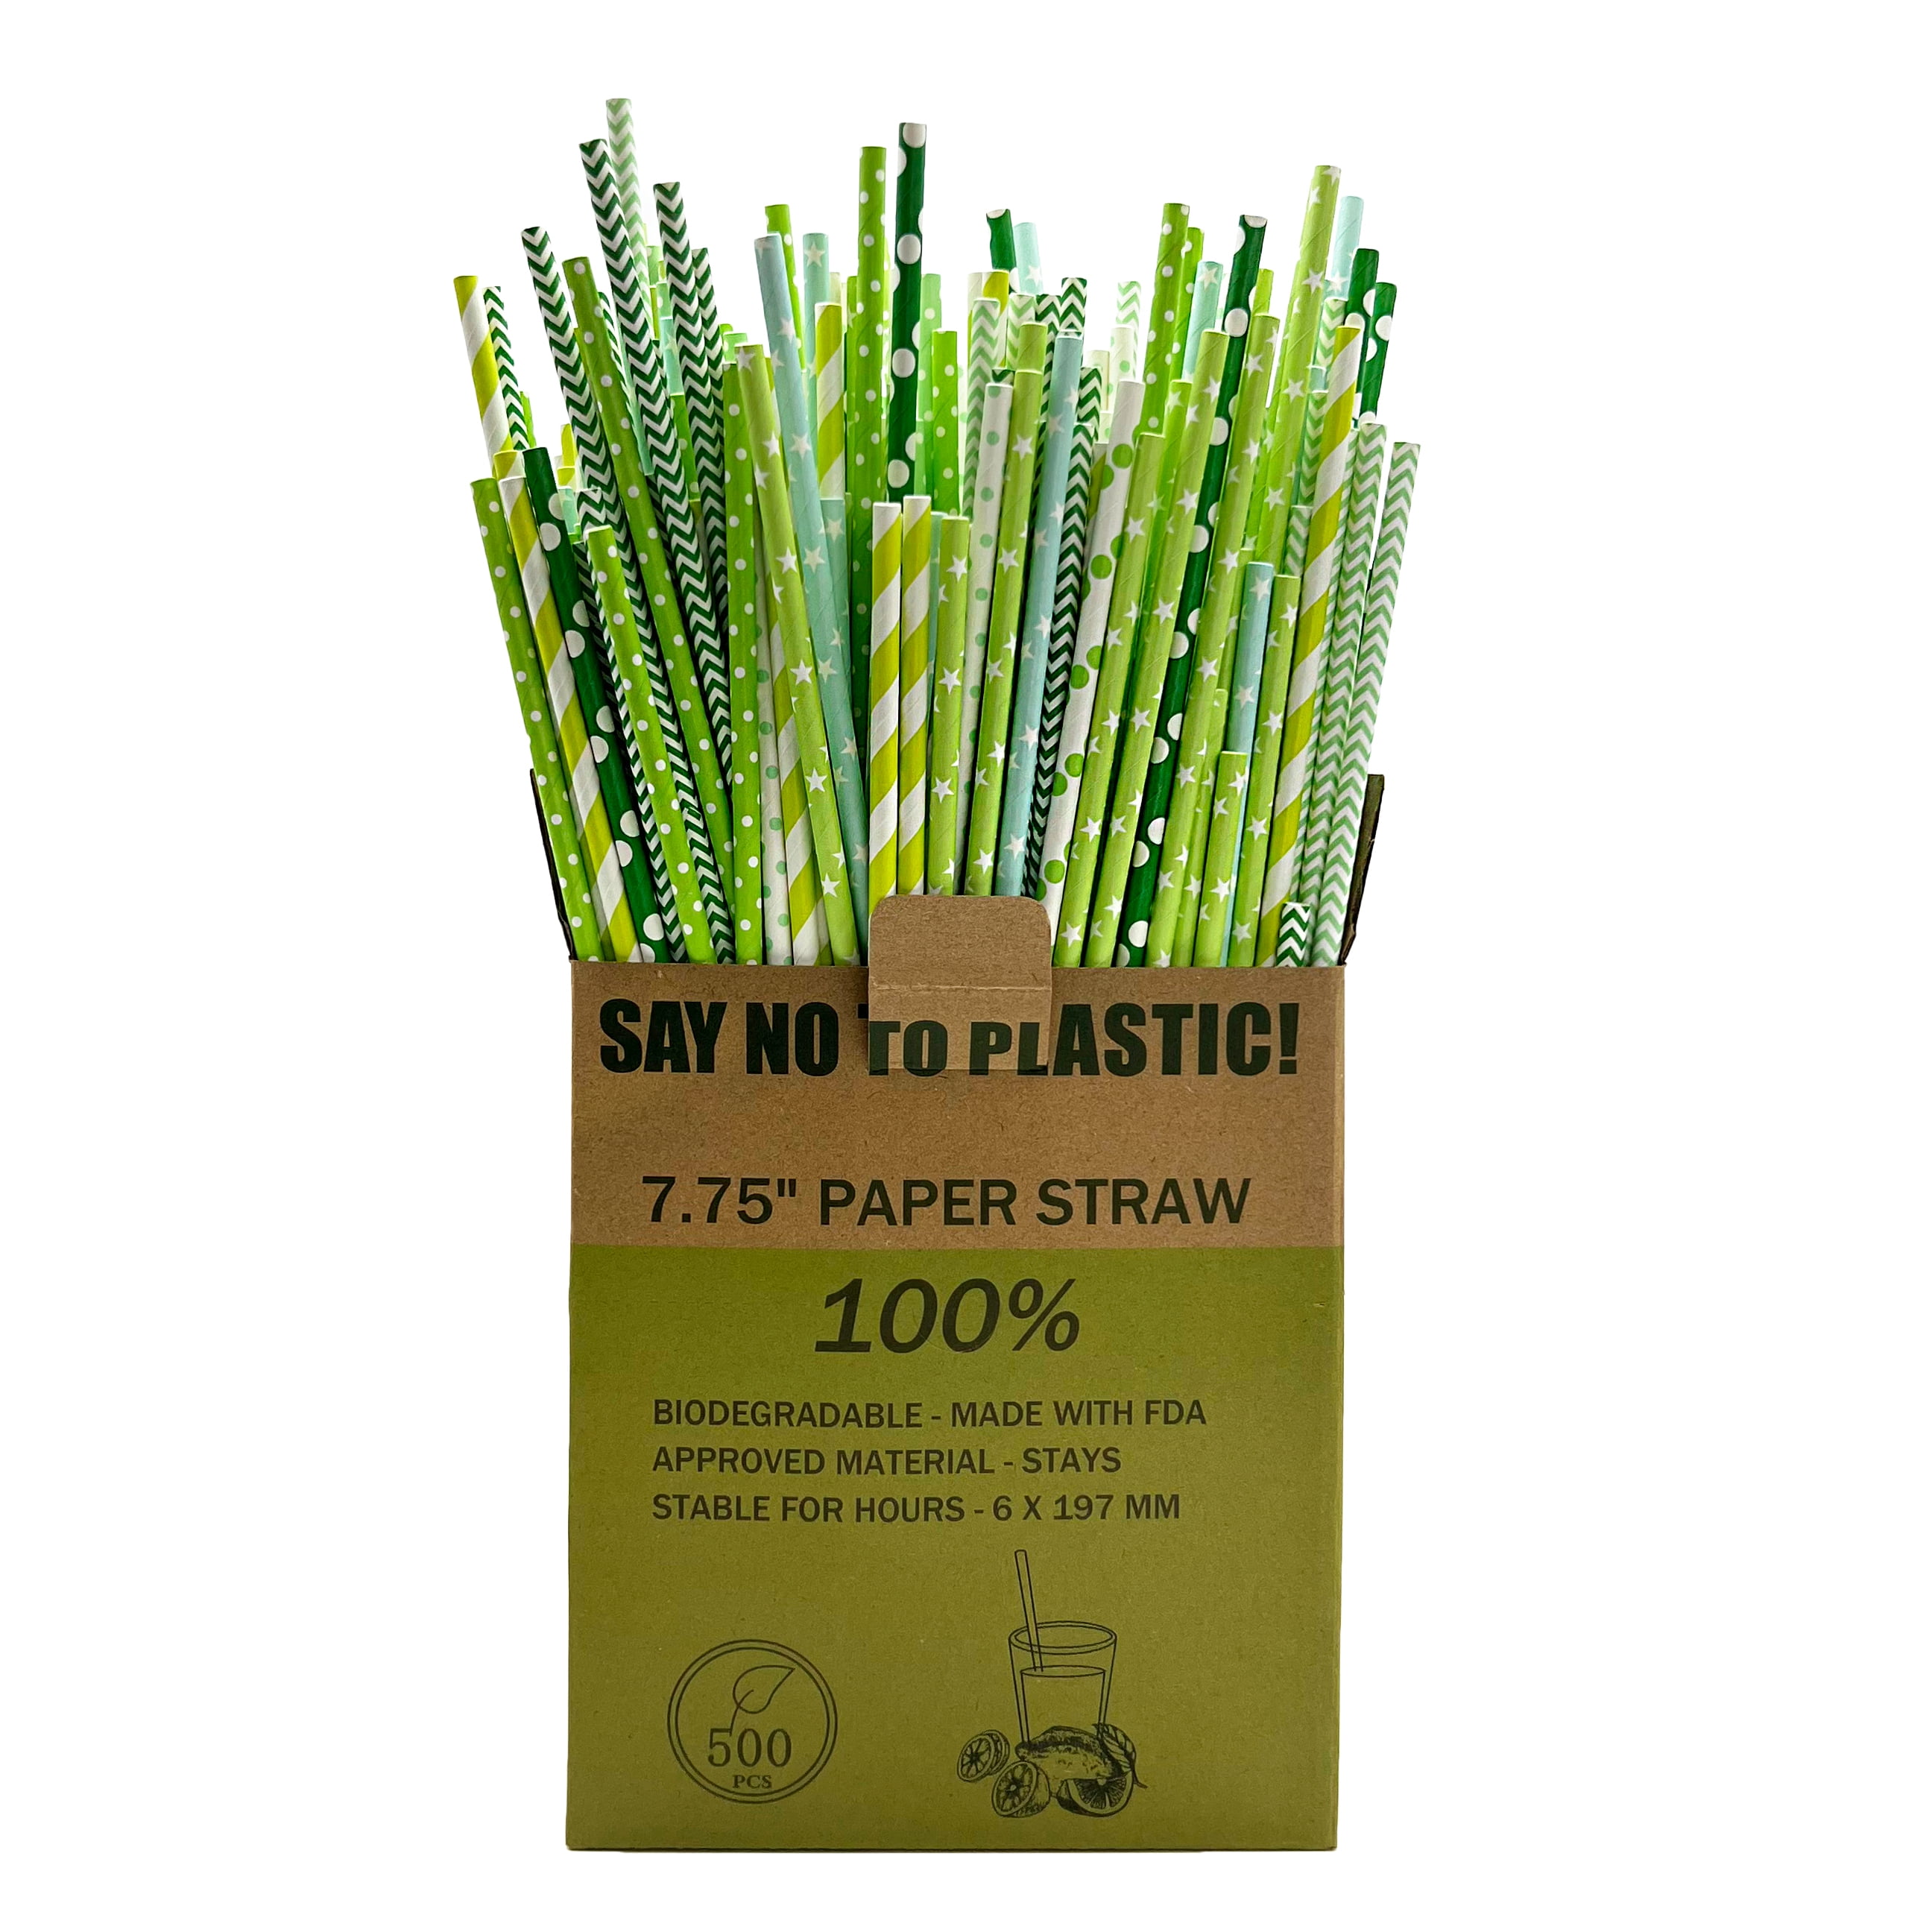 Frozen Snowflake Straws (25 Pack) - Christmas Straws, Teal Green Blue Paper  Straws, Winter Snow Flakes Party Supplies